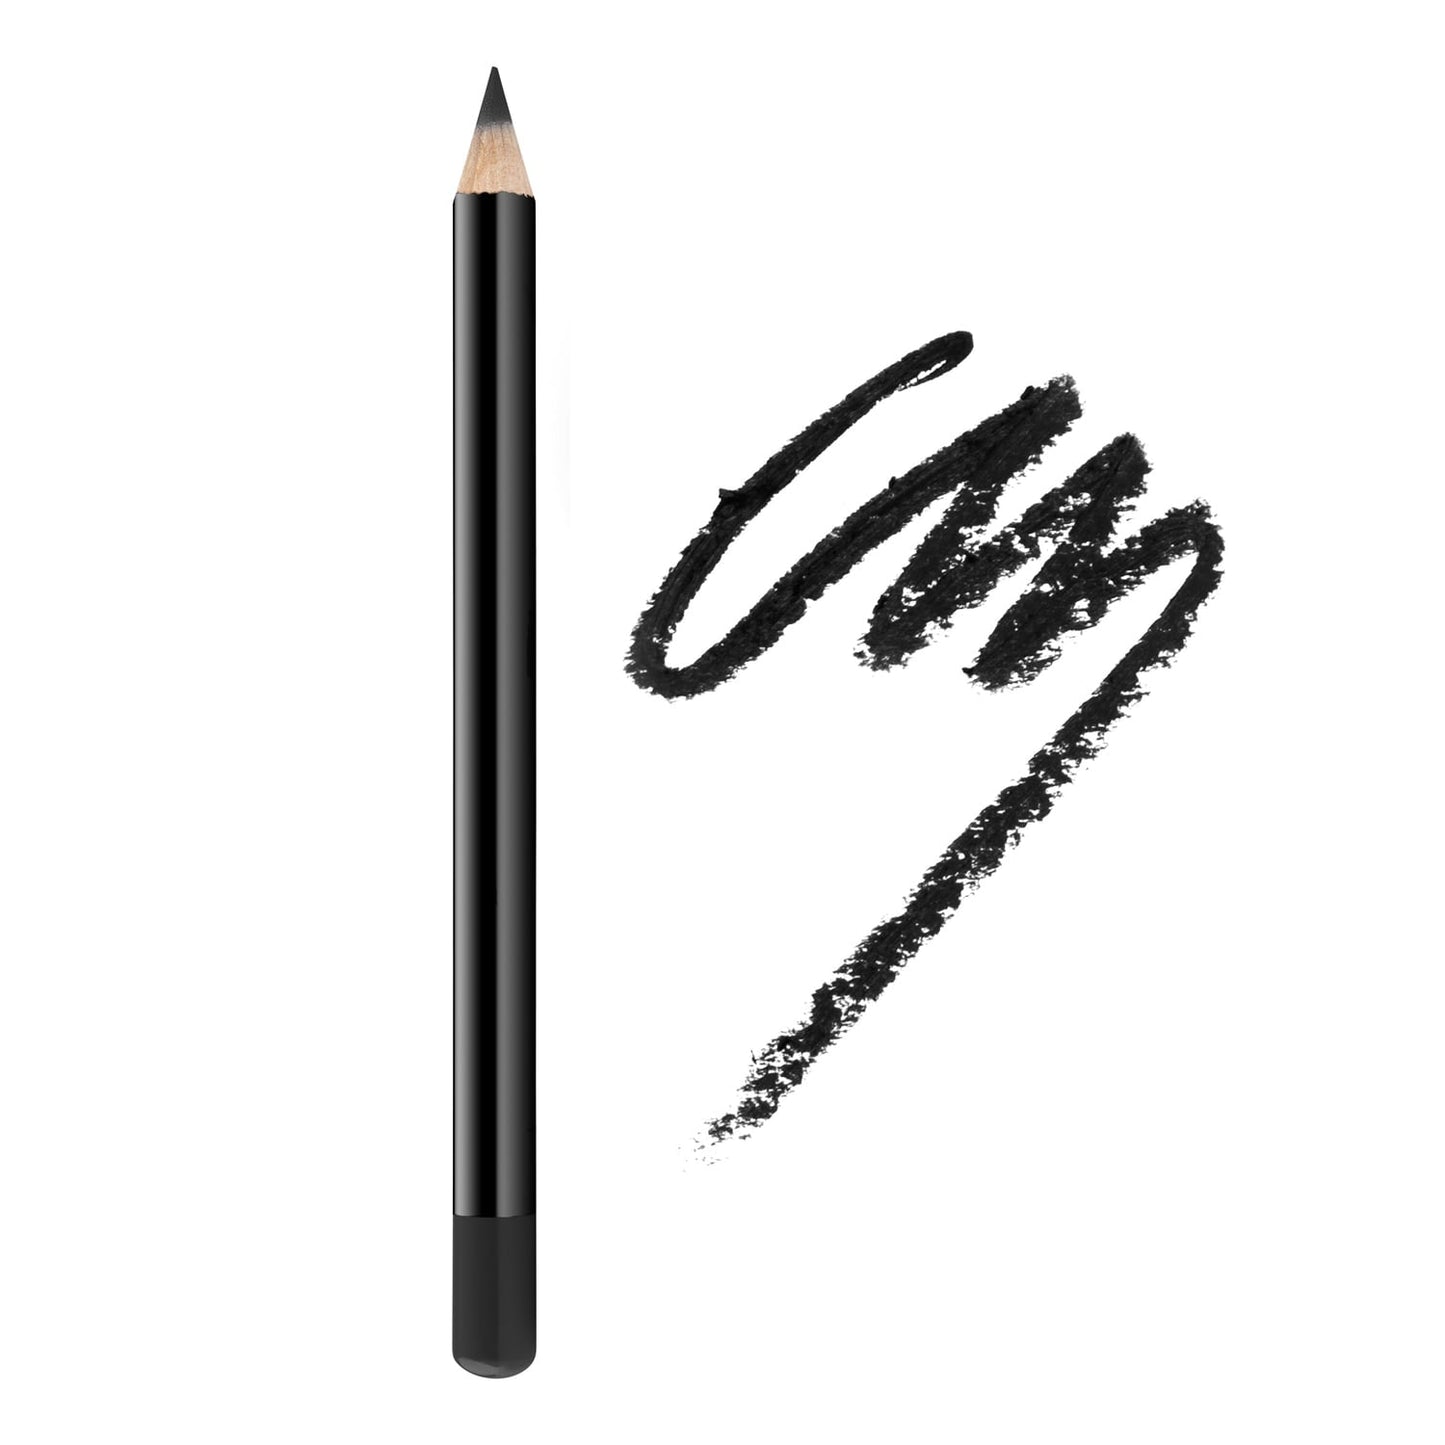 Eyeliner Pencil - M&H FashionEyeliner Pencileye-pencilM&H FashionM&H FashionEye-Pencil-2Black Eye Pencil (02)Eyeliner PencilM&H Fashioneye-pencilM&H Fashion These cushiony, creamy eyeliner pencil deliver powerful, vibrant color that slides on smoothly. The soft texture glides on effortlessly because of the high-quality Eyeliner Pencil